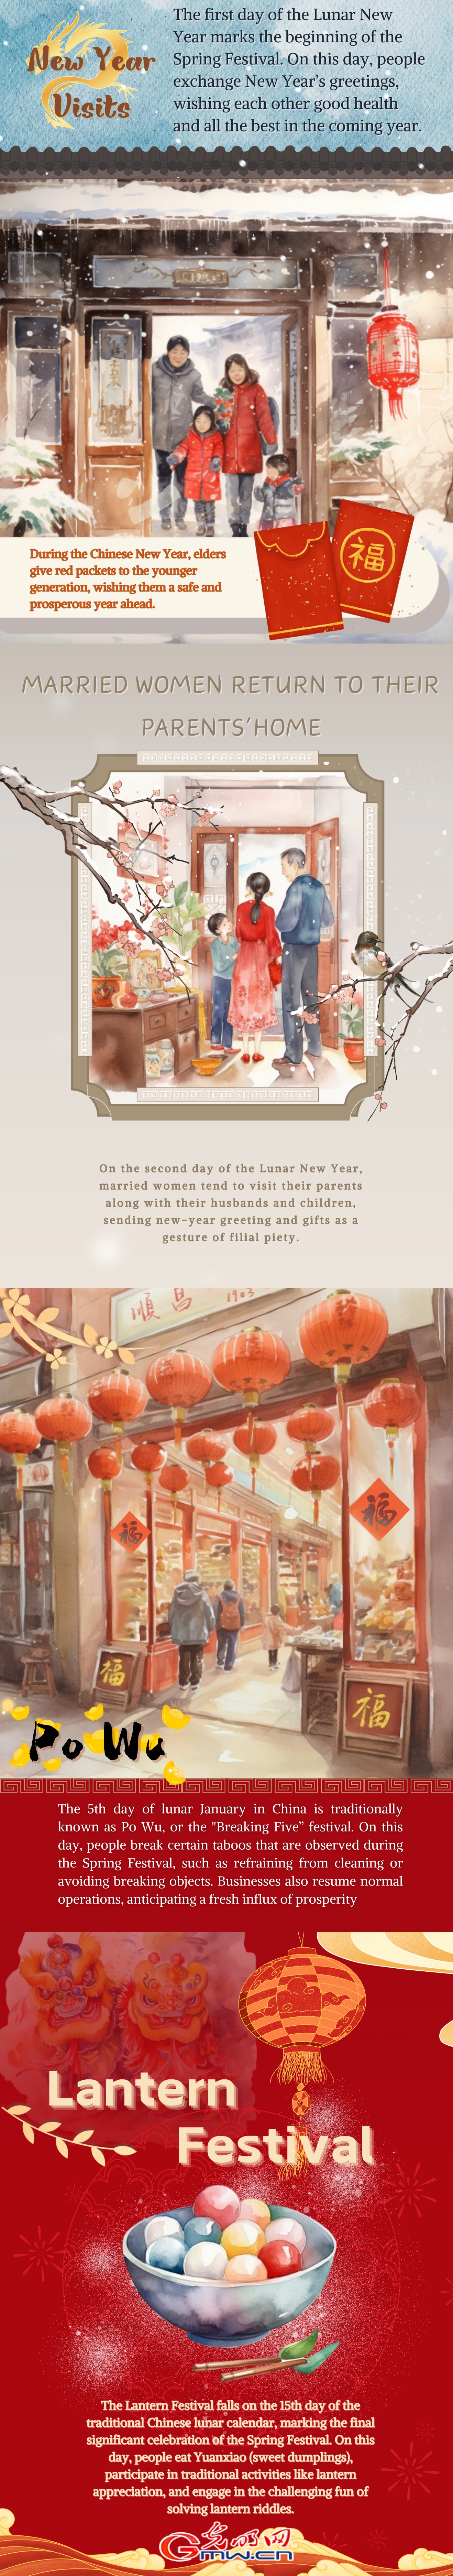 Journey through Spring Festival: A Poster Guide